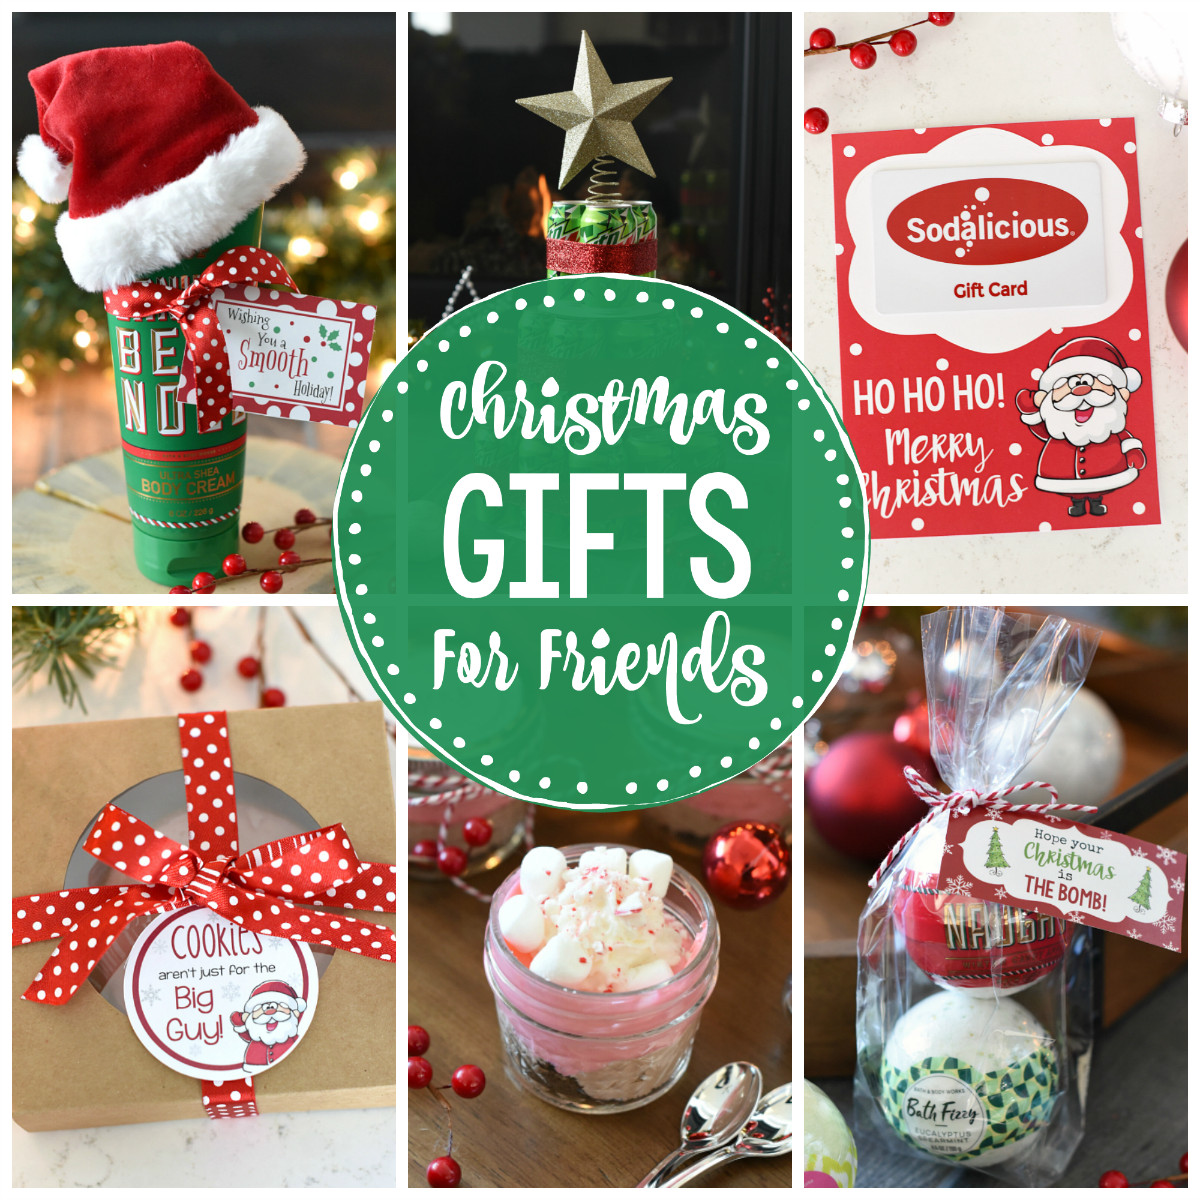 Great Holiday Gift Ideas
 Good Gifts for Friends at Christmas – Fun Squared